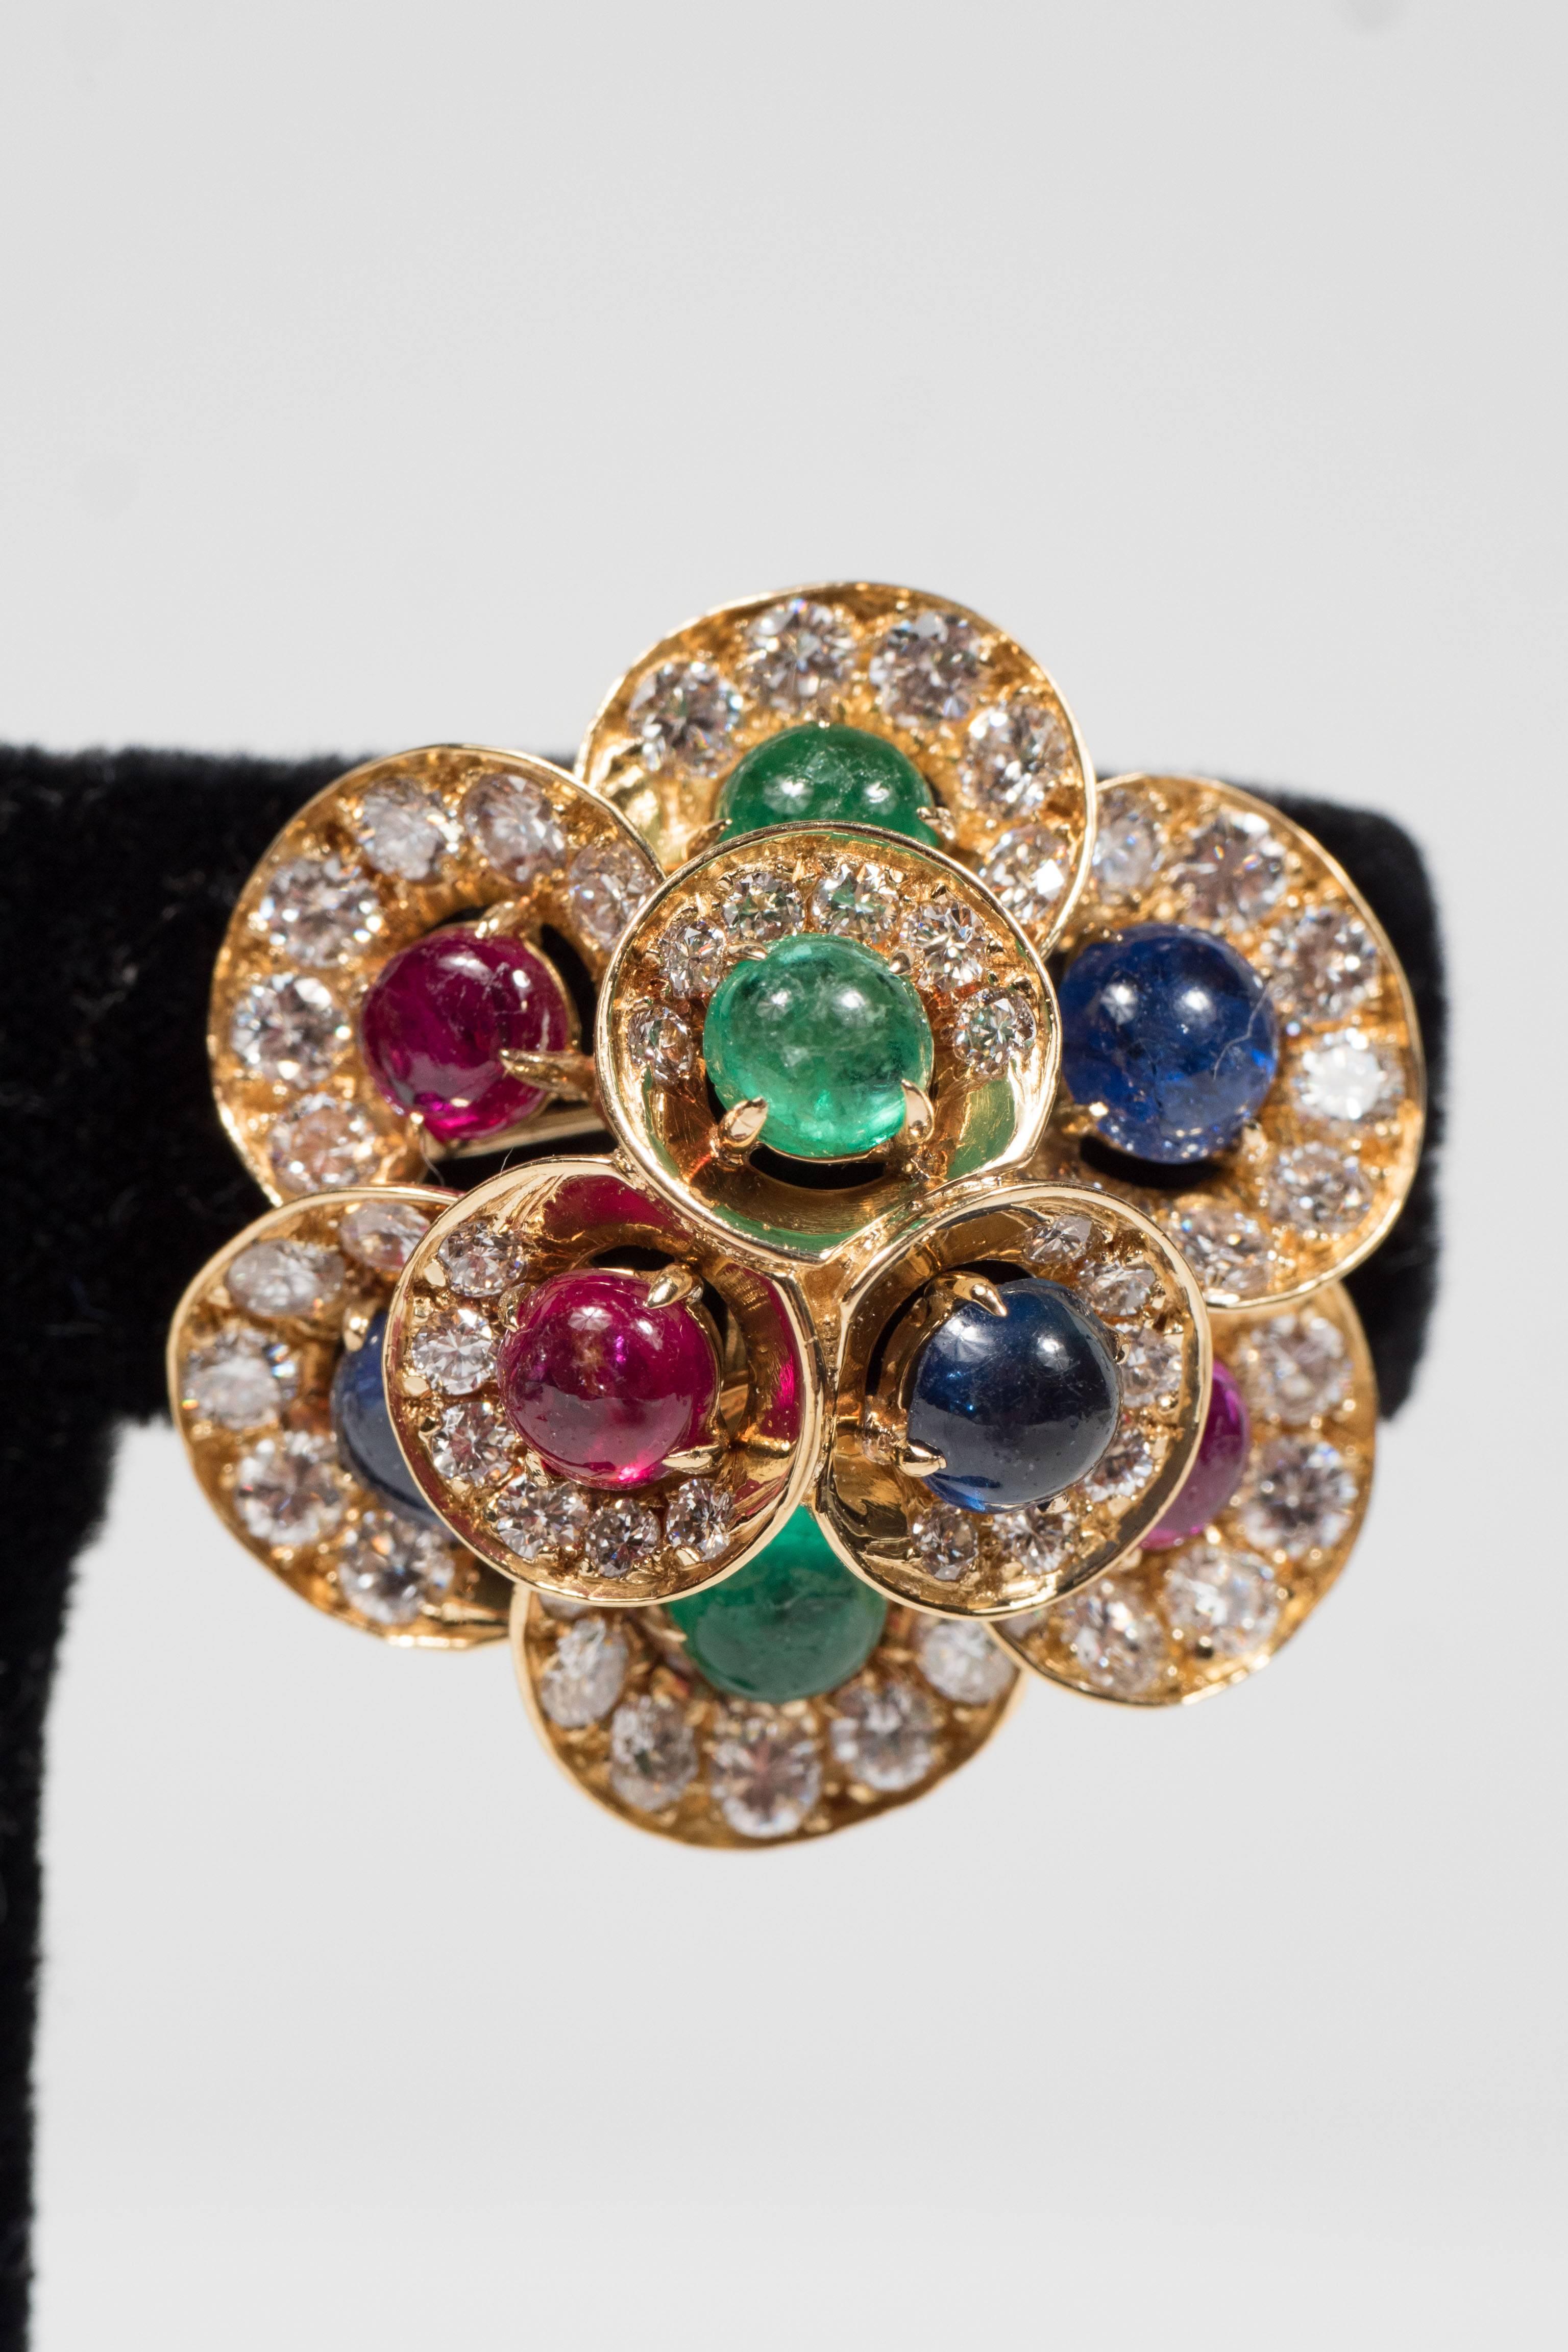 These stunning Mid-Century Modernist earrings are designed as clusters centering 3 ruby, 3 sapphire and 3 emerald cabochons measuring 4.5 mm, the cabochons surrounded by 120 round diamonds weighing approximately 5.25 carats, with a gross weight of